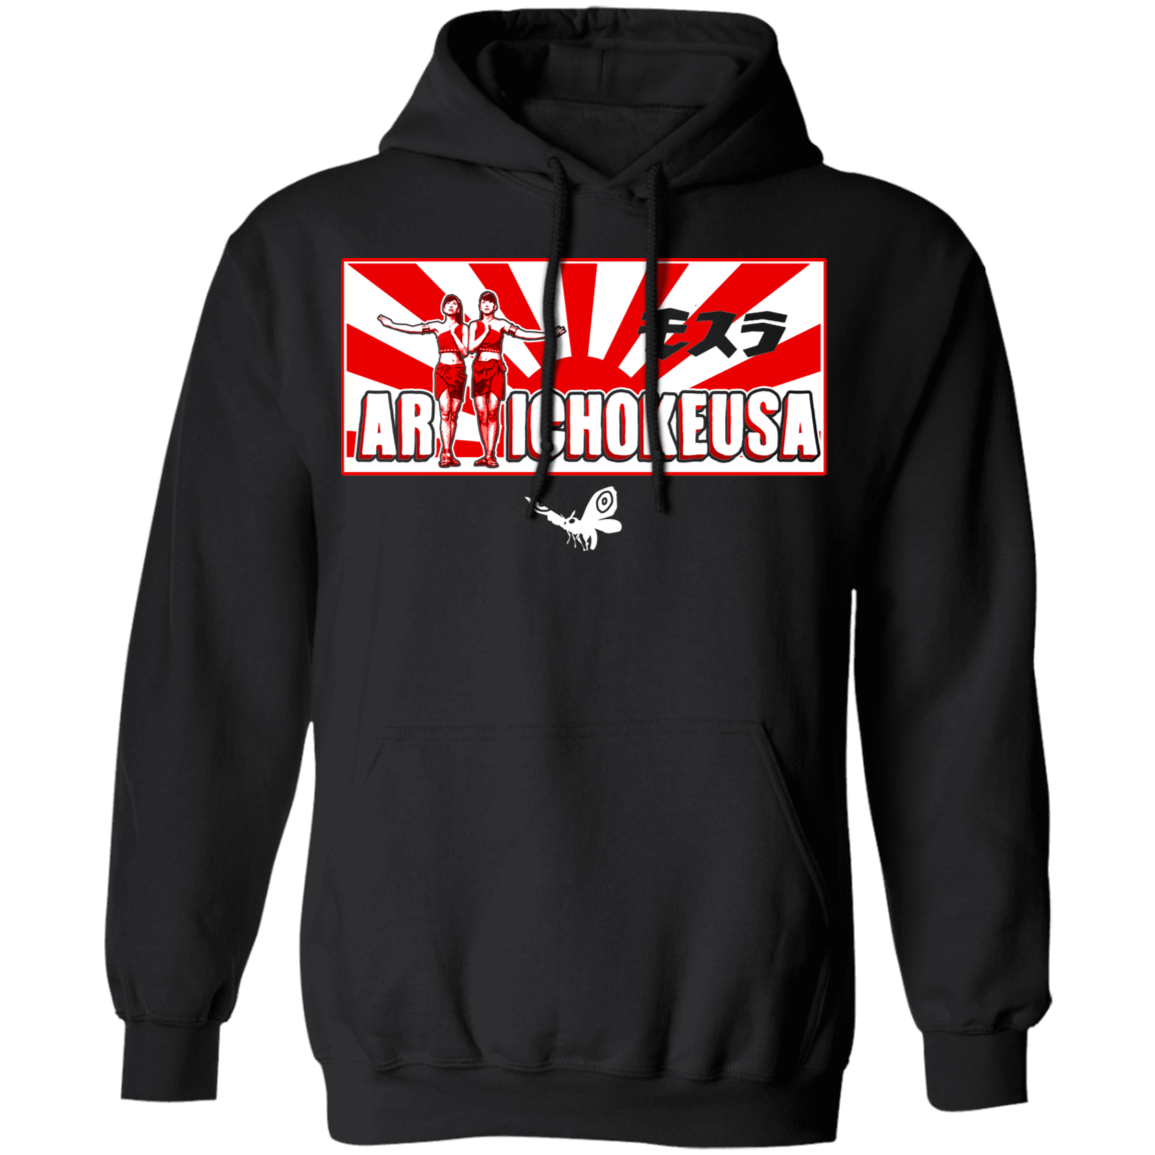 ArtichokeUSA Character and Font design. Shobijin (Twins)/Mothra Fan Art . Let's Create Your Own Design Today. Basic Pullover Hoodie